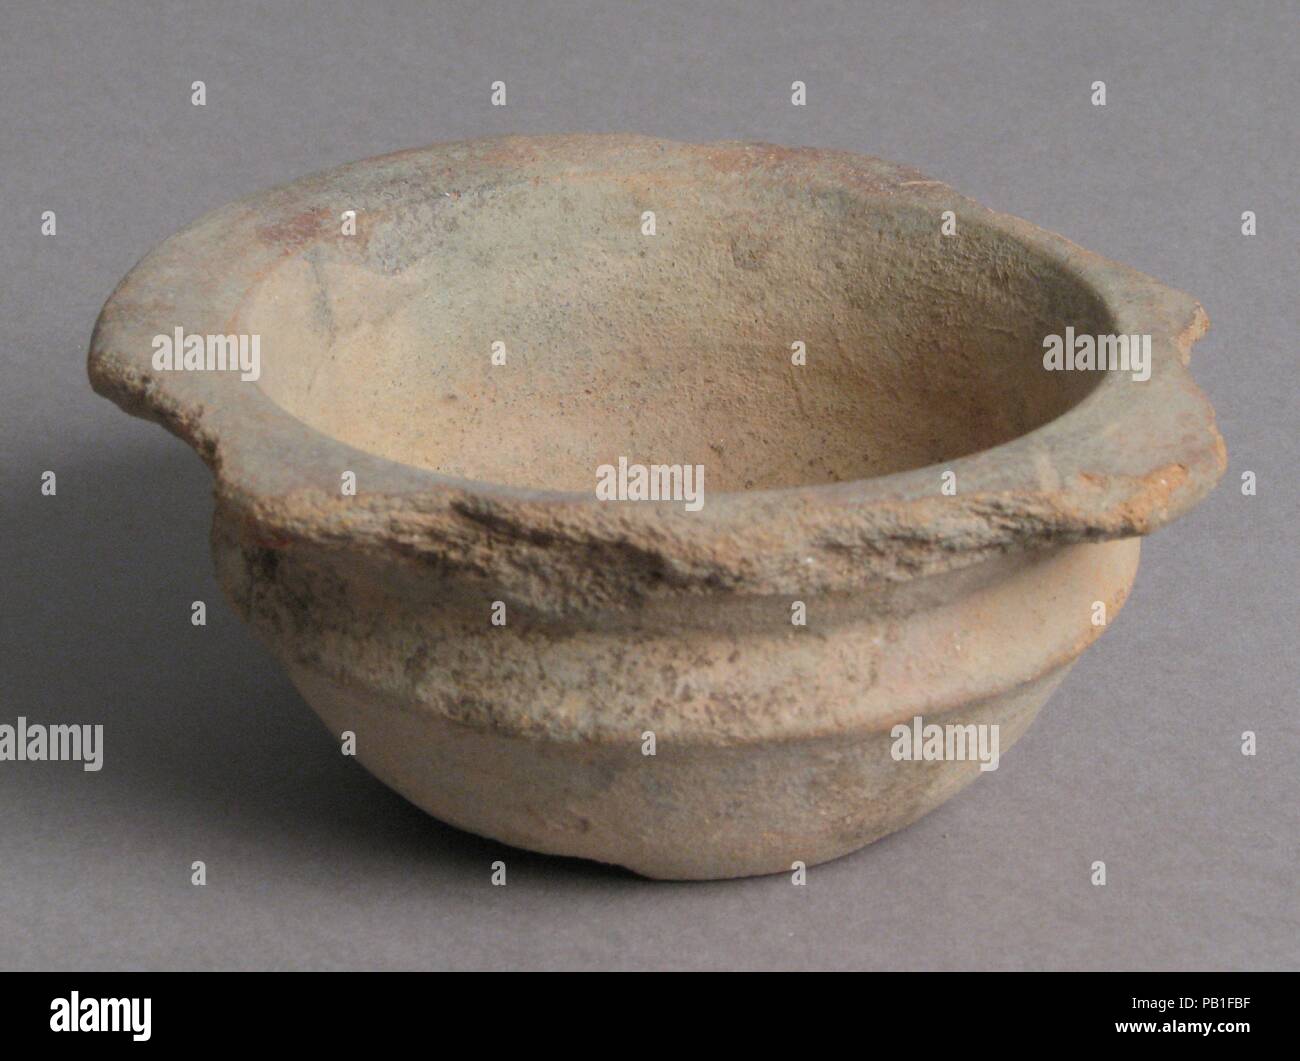 Bowl. Culture: Coptic. Dimensions: Overall: 1 5/8 x 3 15/16 in. (4.2 x 10 cm). Date: 4th-7th century. Museum: Metropolitan Museum of Art, New York, USA. Stock Photo